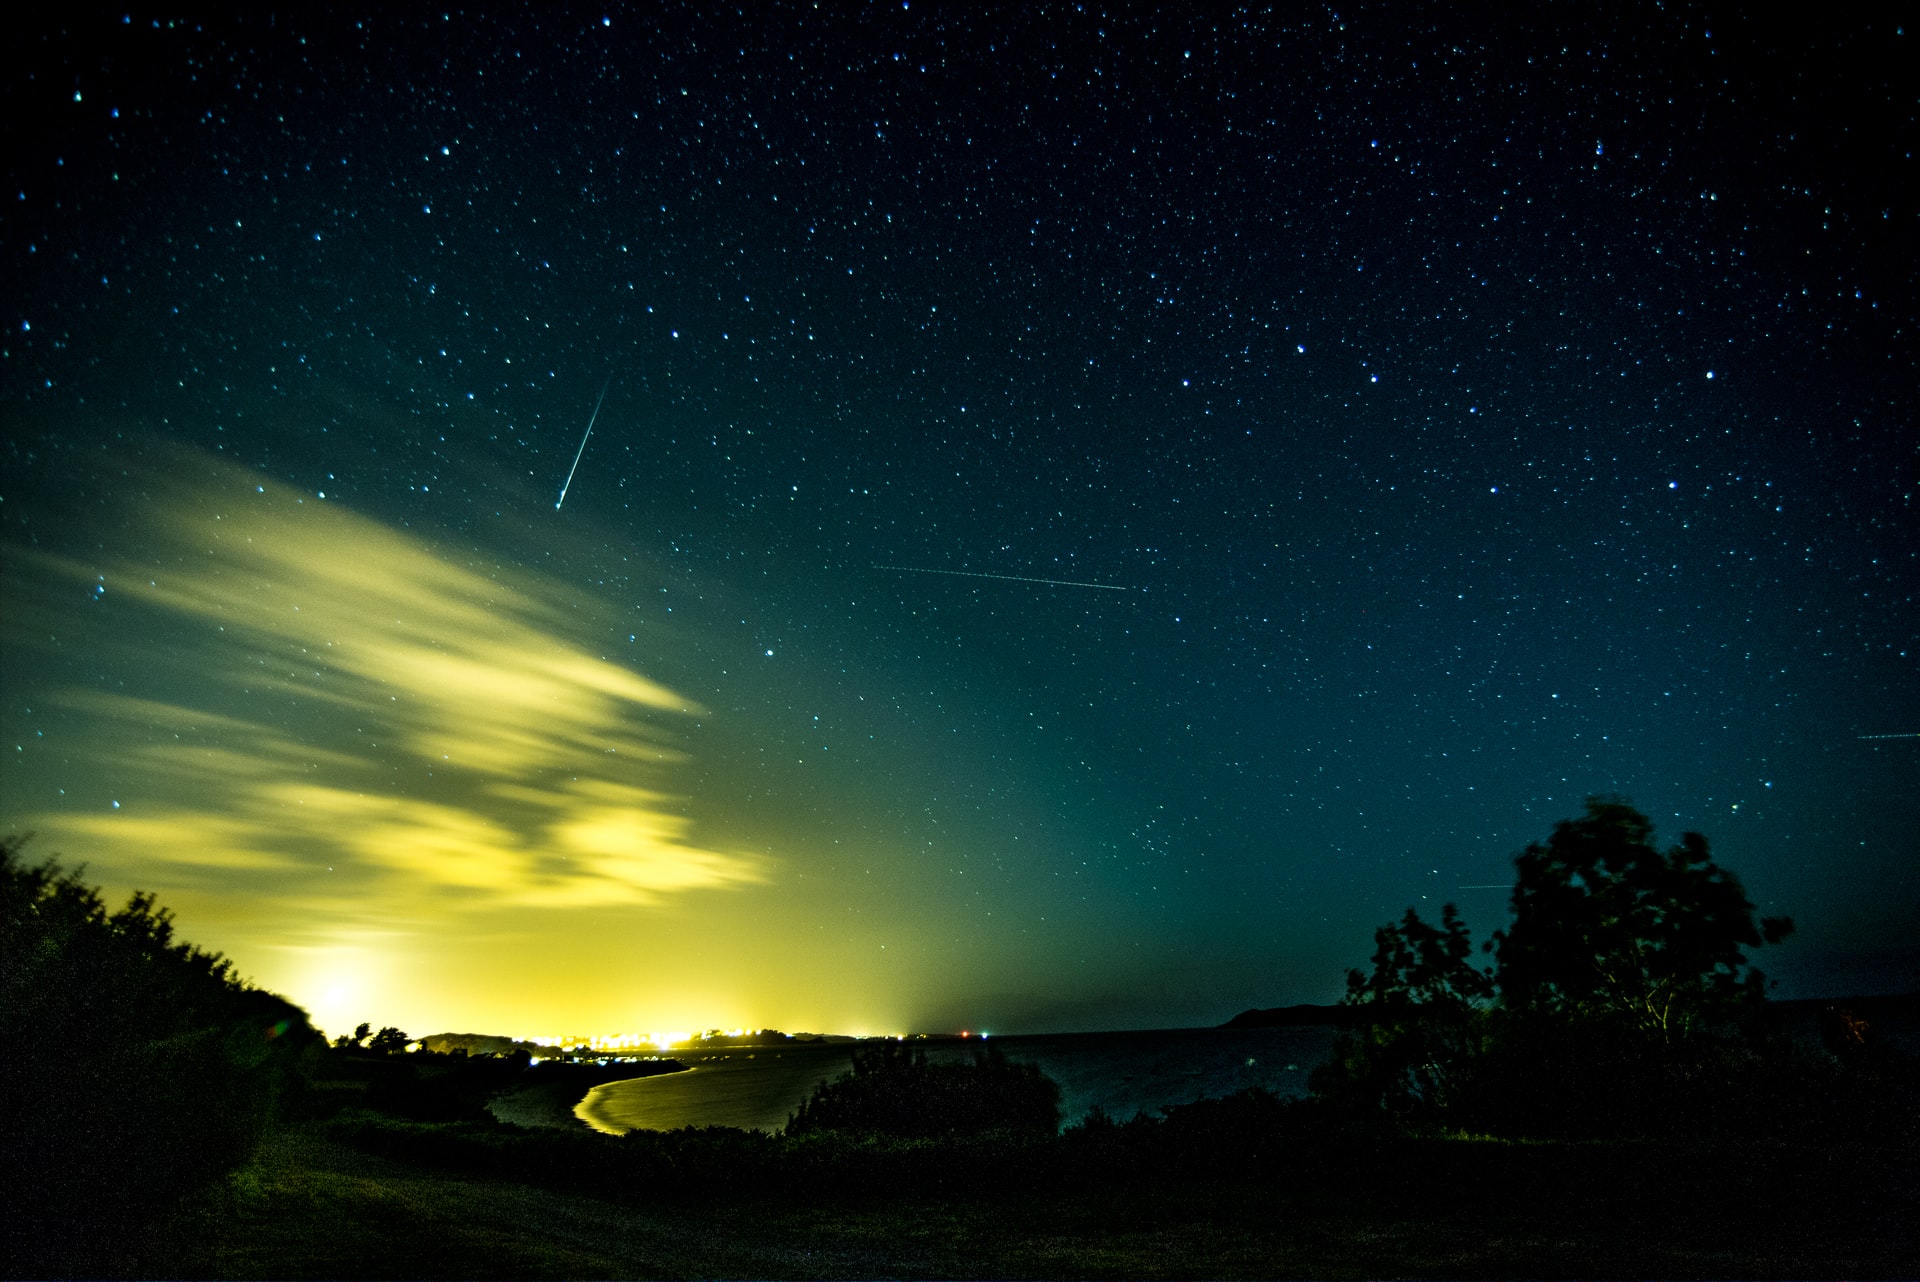 Photo of meteor by Lamna The Shark on Unsplash